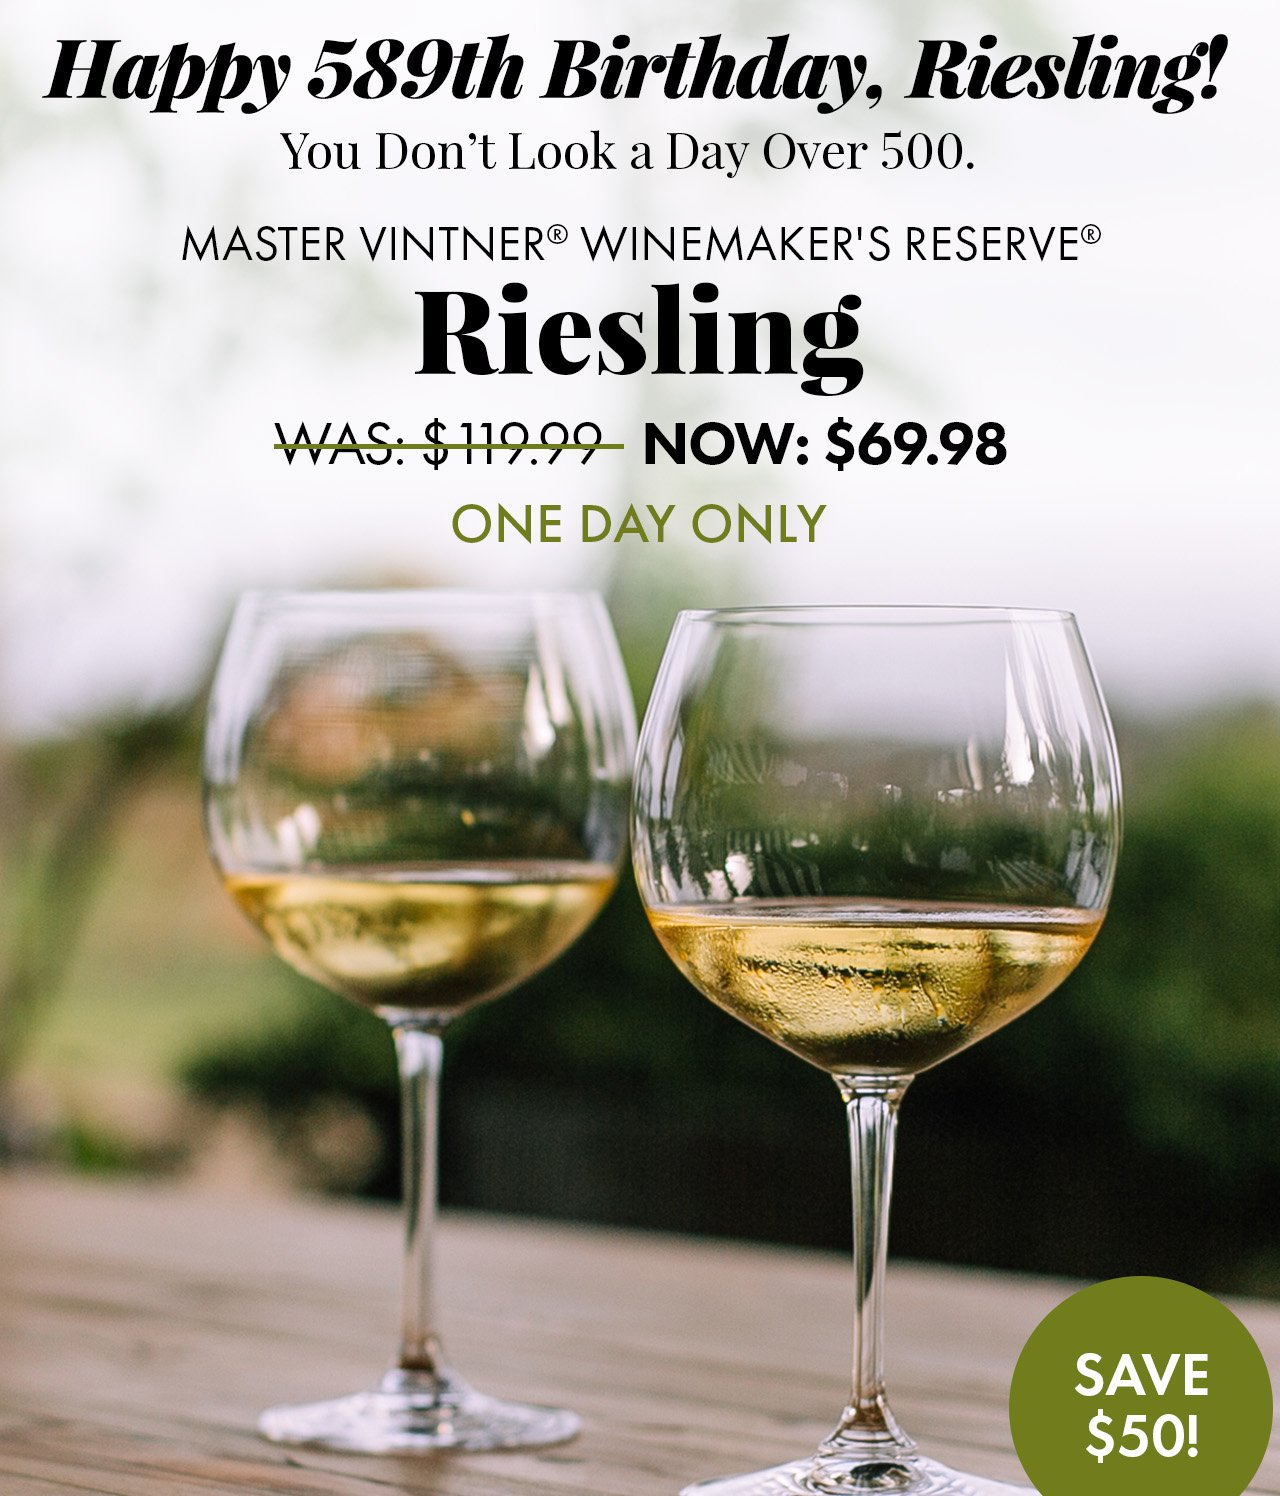 Happy Birthday, Riesling! Take \\$50 Off to Celebrate a Wine that Doesn't Look a Day Over 500